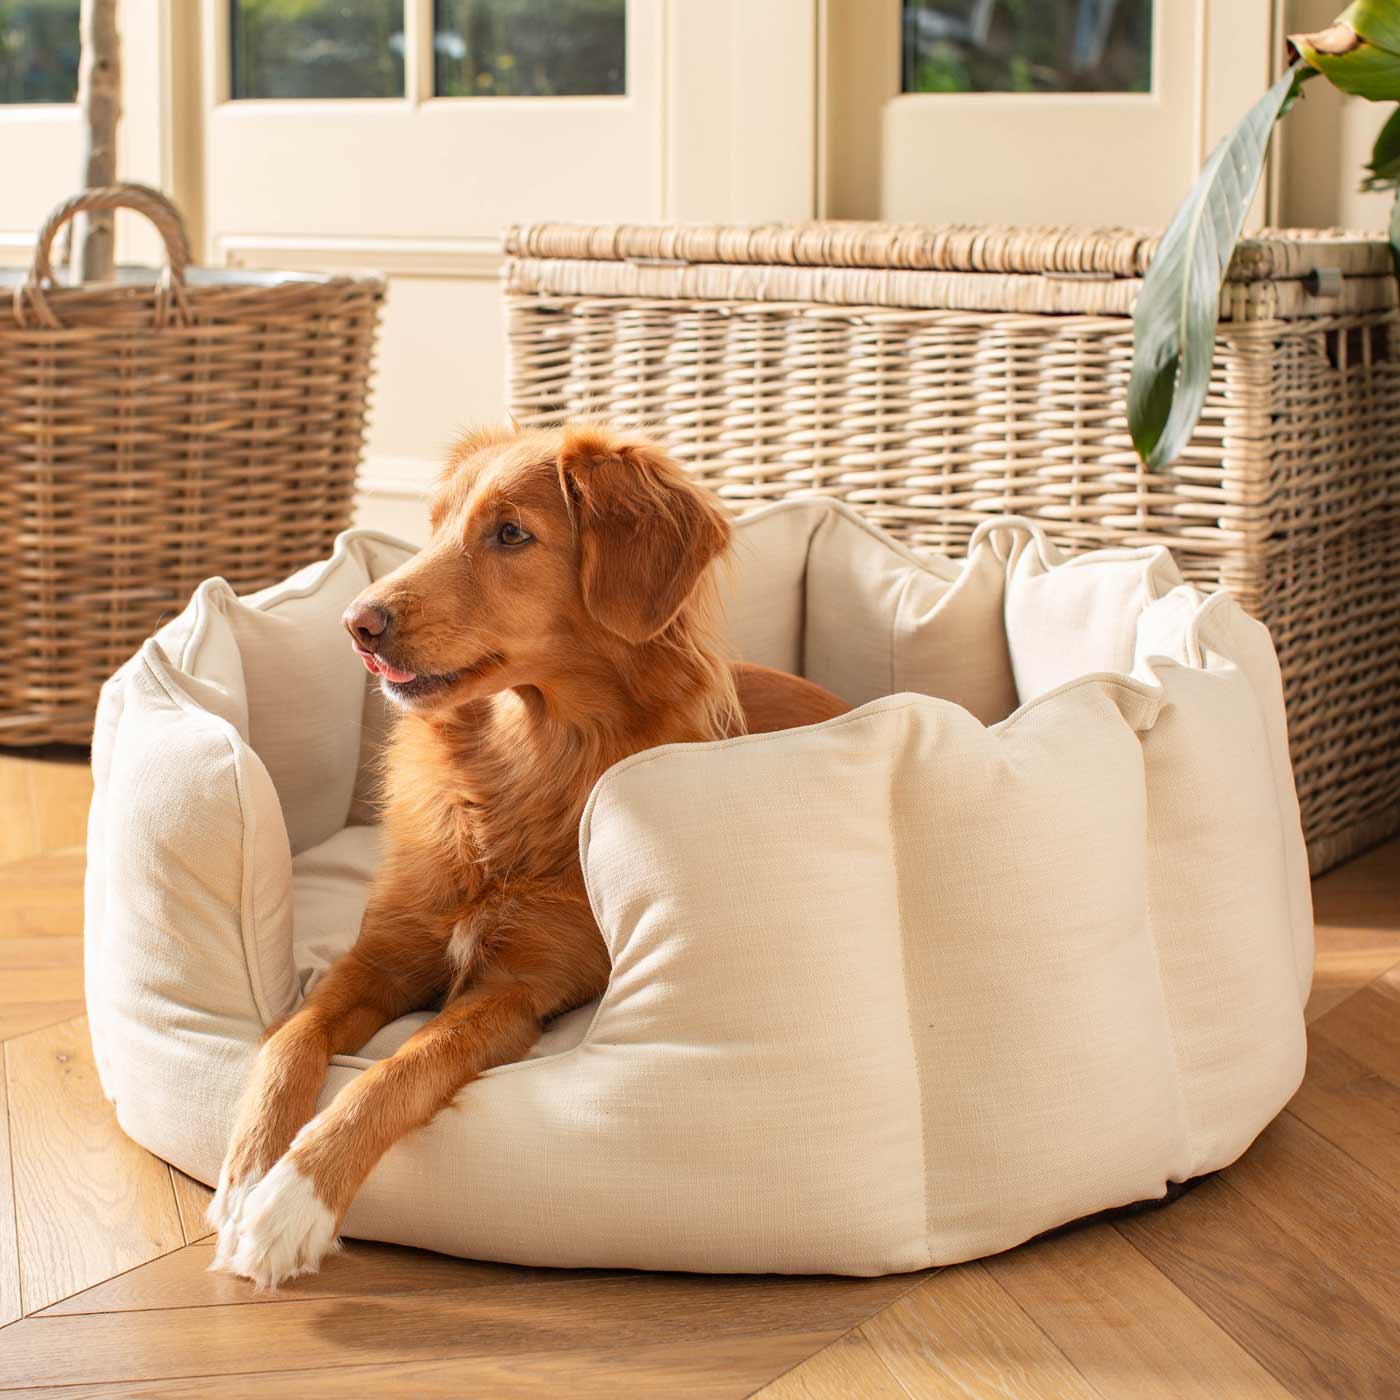 Discover Our Luxurious High Wall Bed For Dogs, Featuring inner pillow with plush teddy fleece on one side To Craft The Perfect Dogs Bed In Stunning Savanna Bone! Available To Personalize Now at Lords & Labradors US